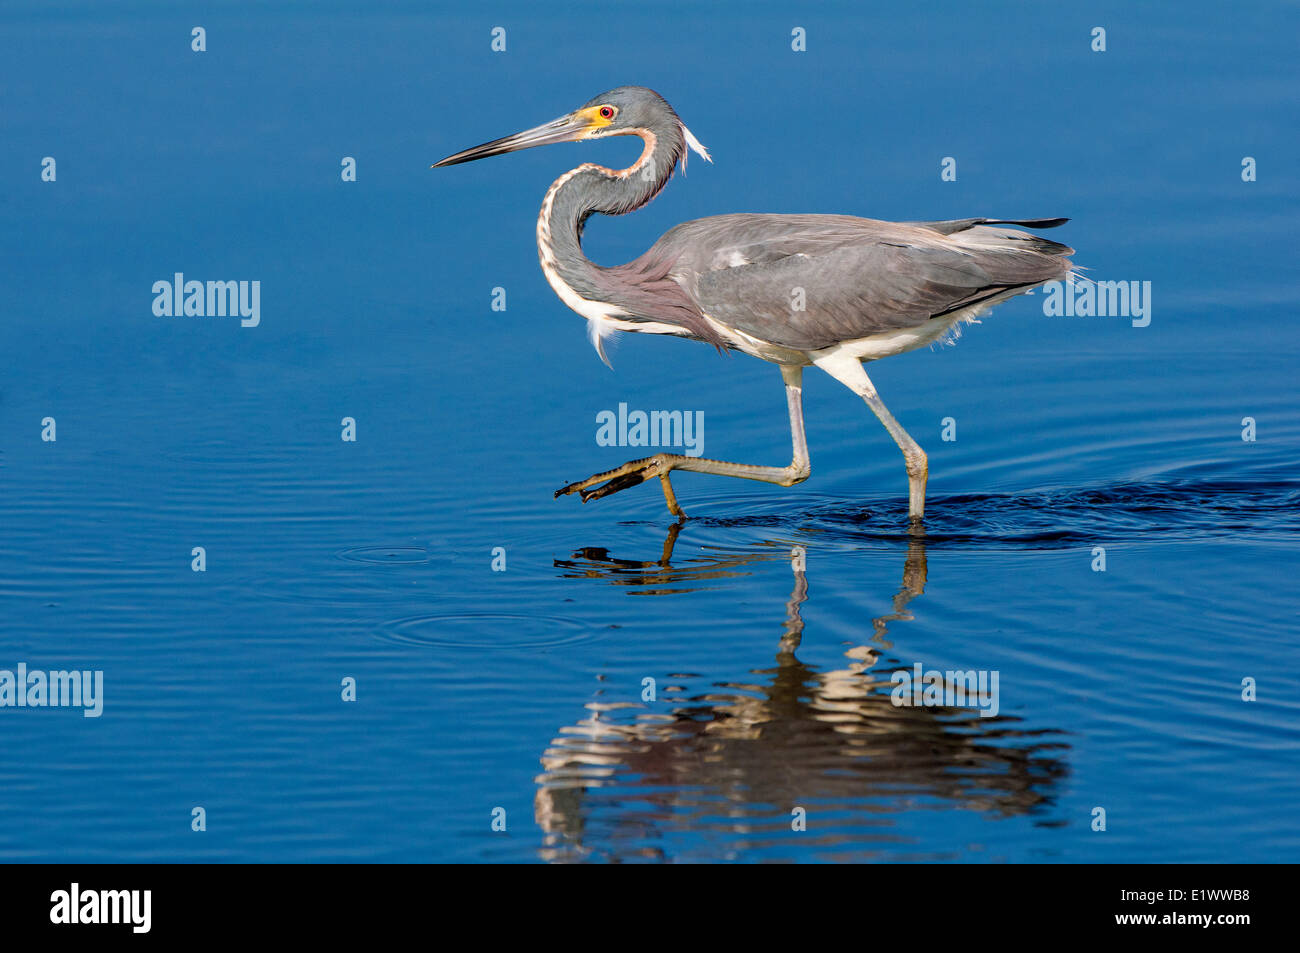 Adult tricolored heron (Egretta tricolor), hunting in shallow water, southern Louisiana, USA Stock Photo